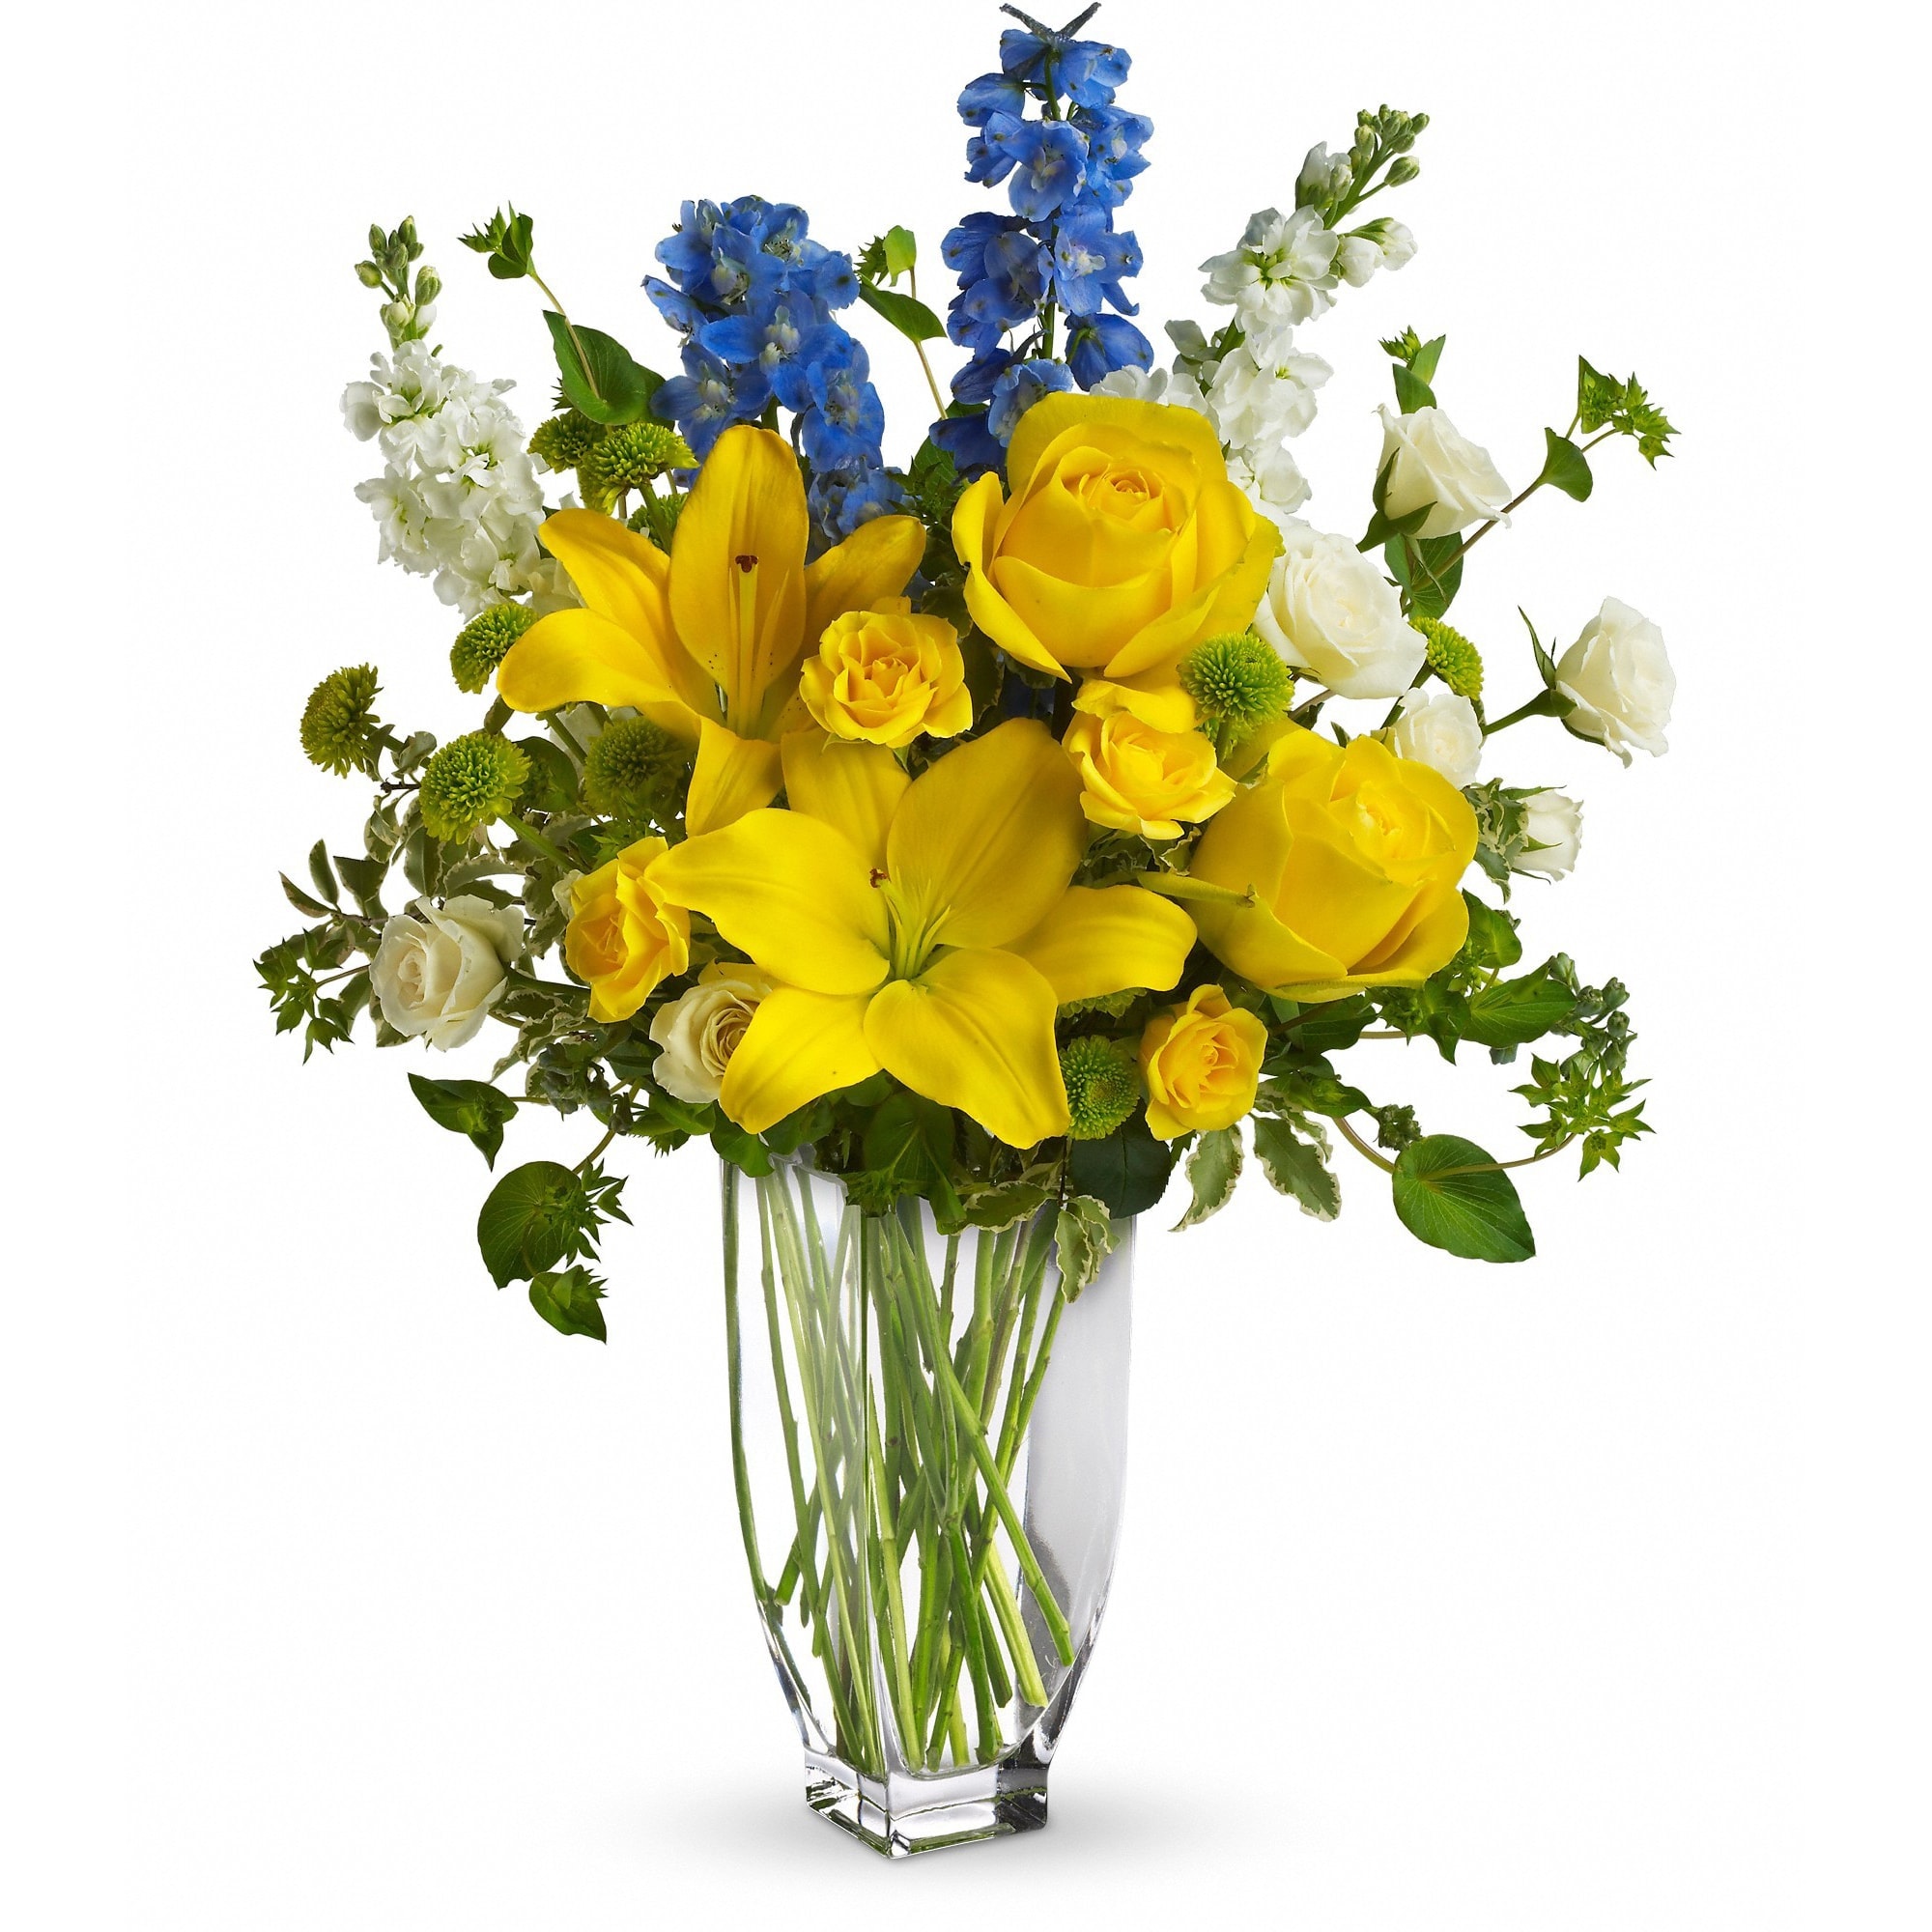 Meet Me In Provence  - With a beauty reminiscent of the south of France, this proud and pretty arrangement holds nothing back. The colors, the flowers and the feeling of Provence are all present and accounted for in this wonderful bouquet.